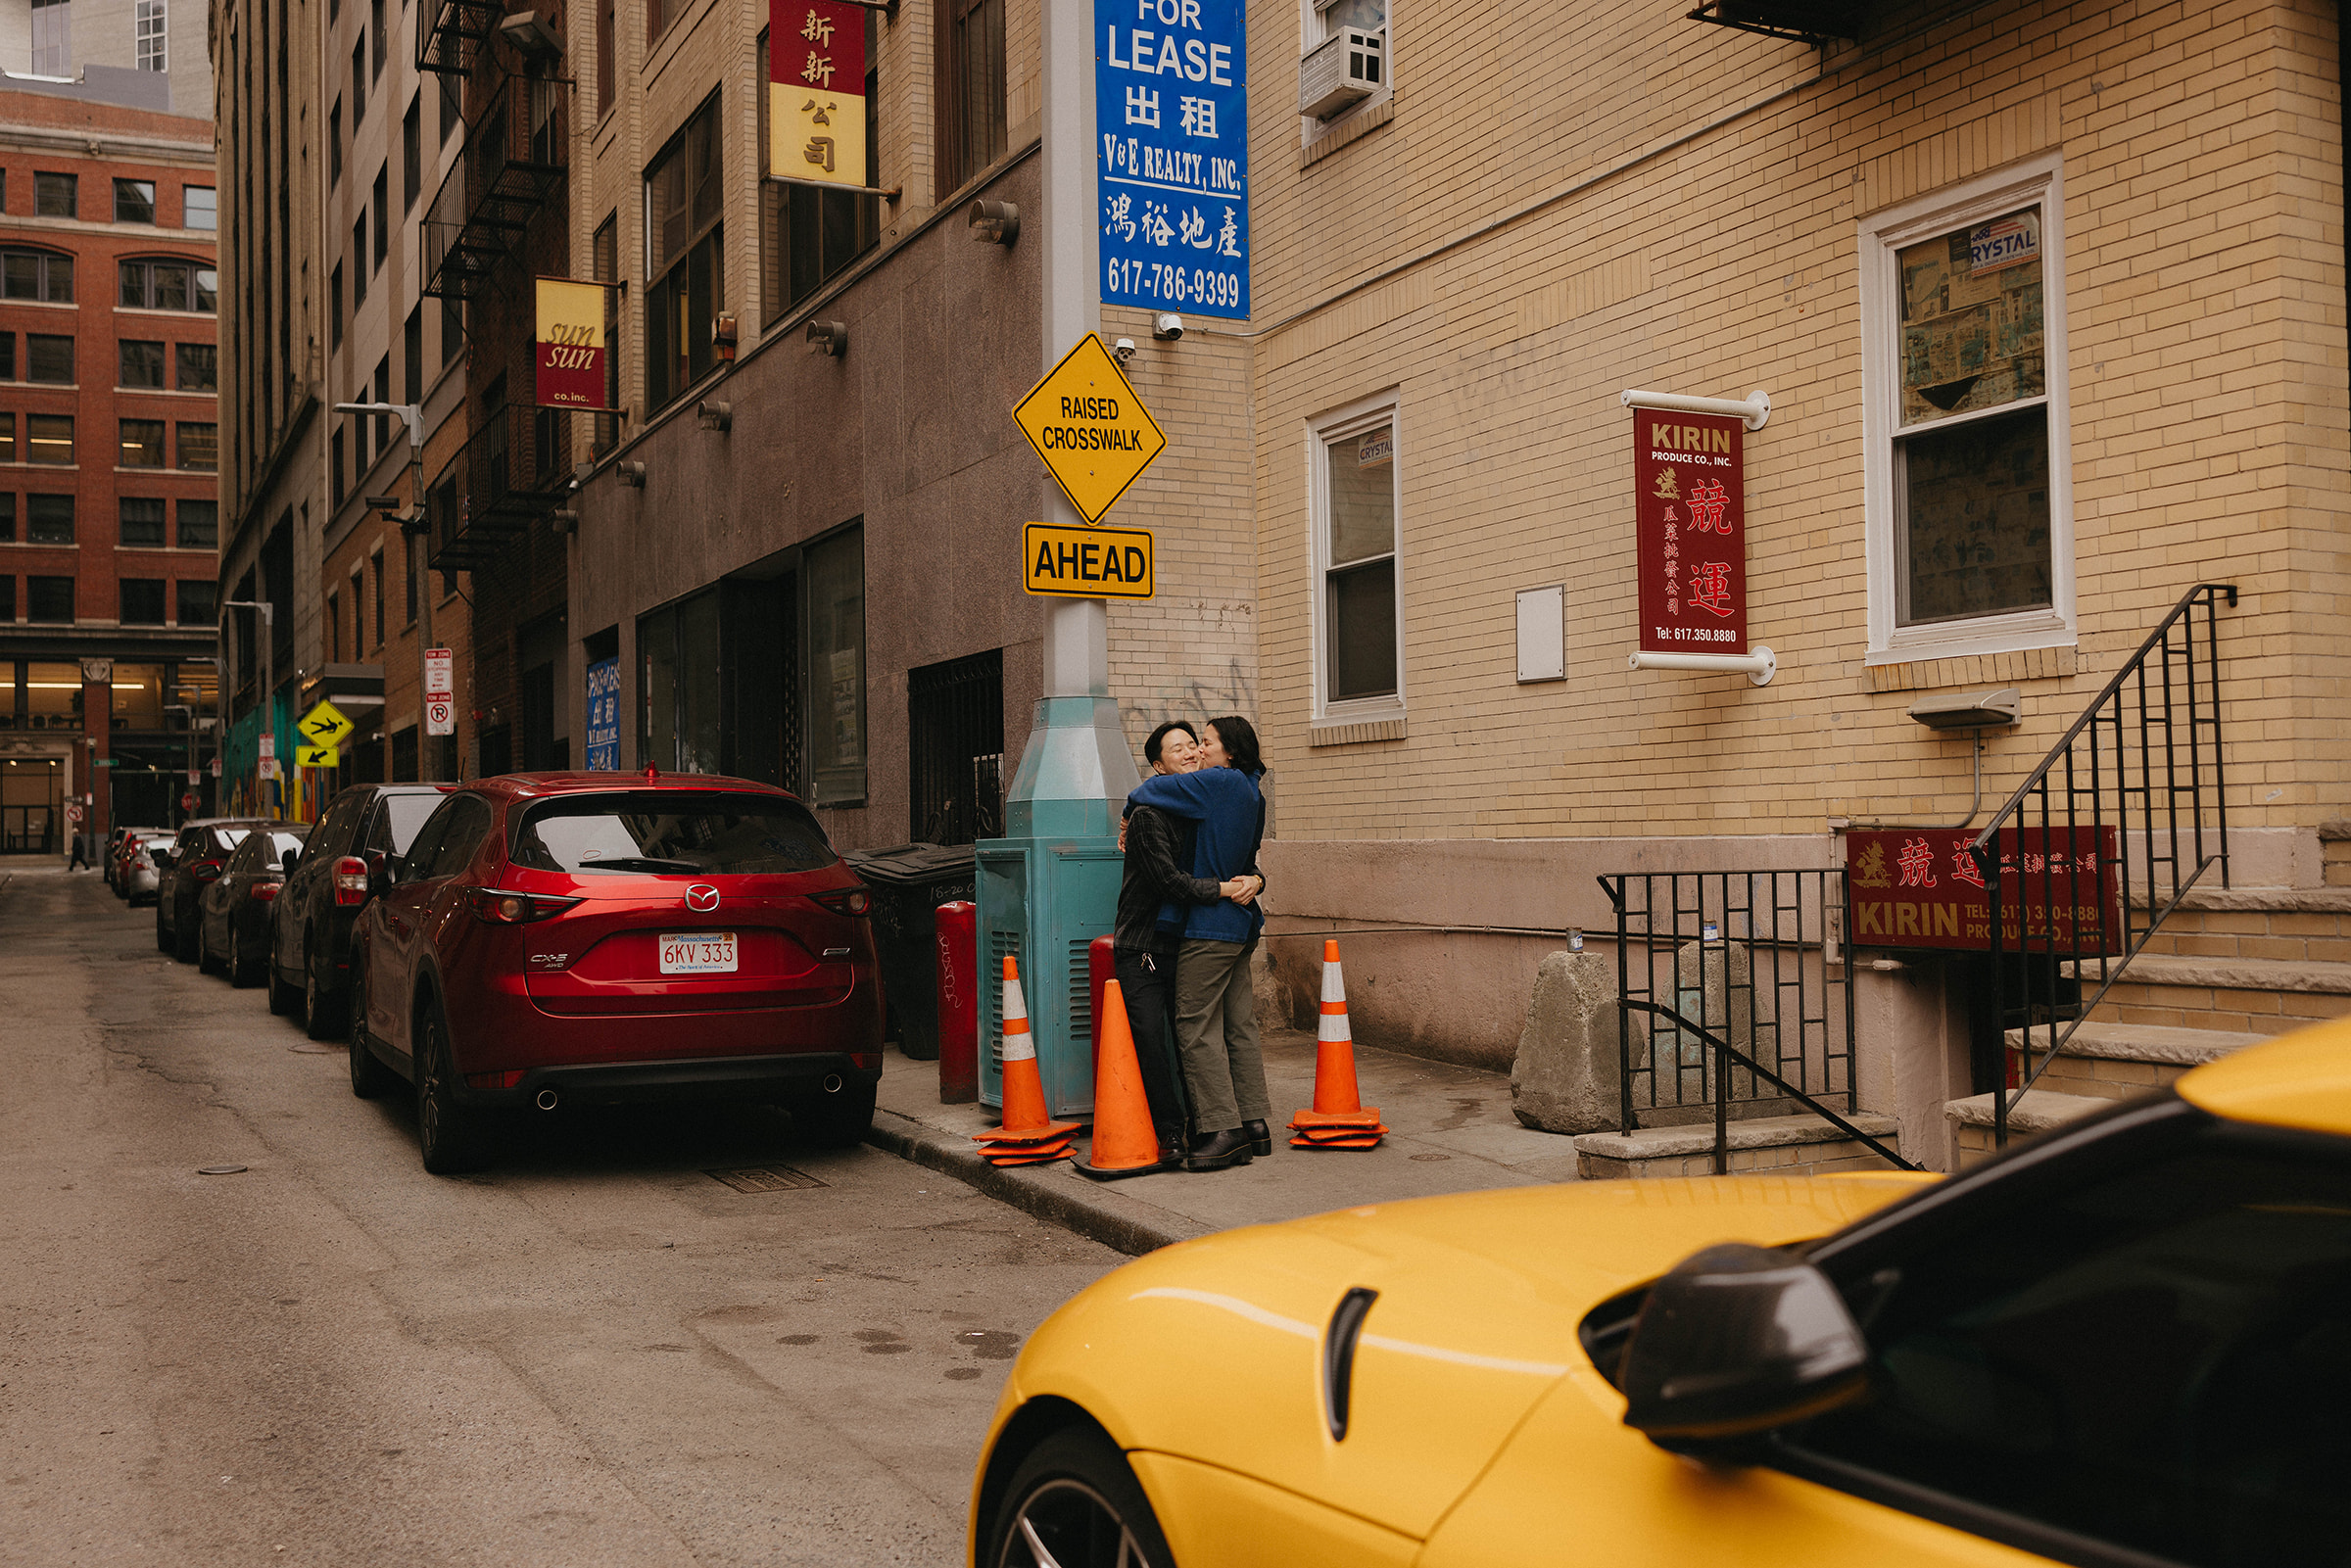 Julie & Soo Bin embrace in this iconic boston chinatown engagement photo location